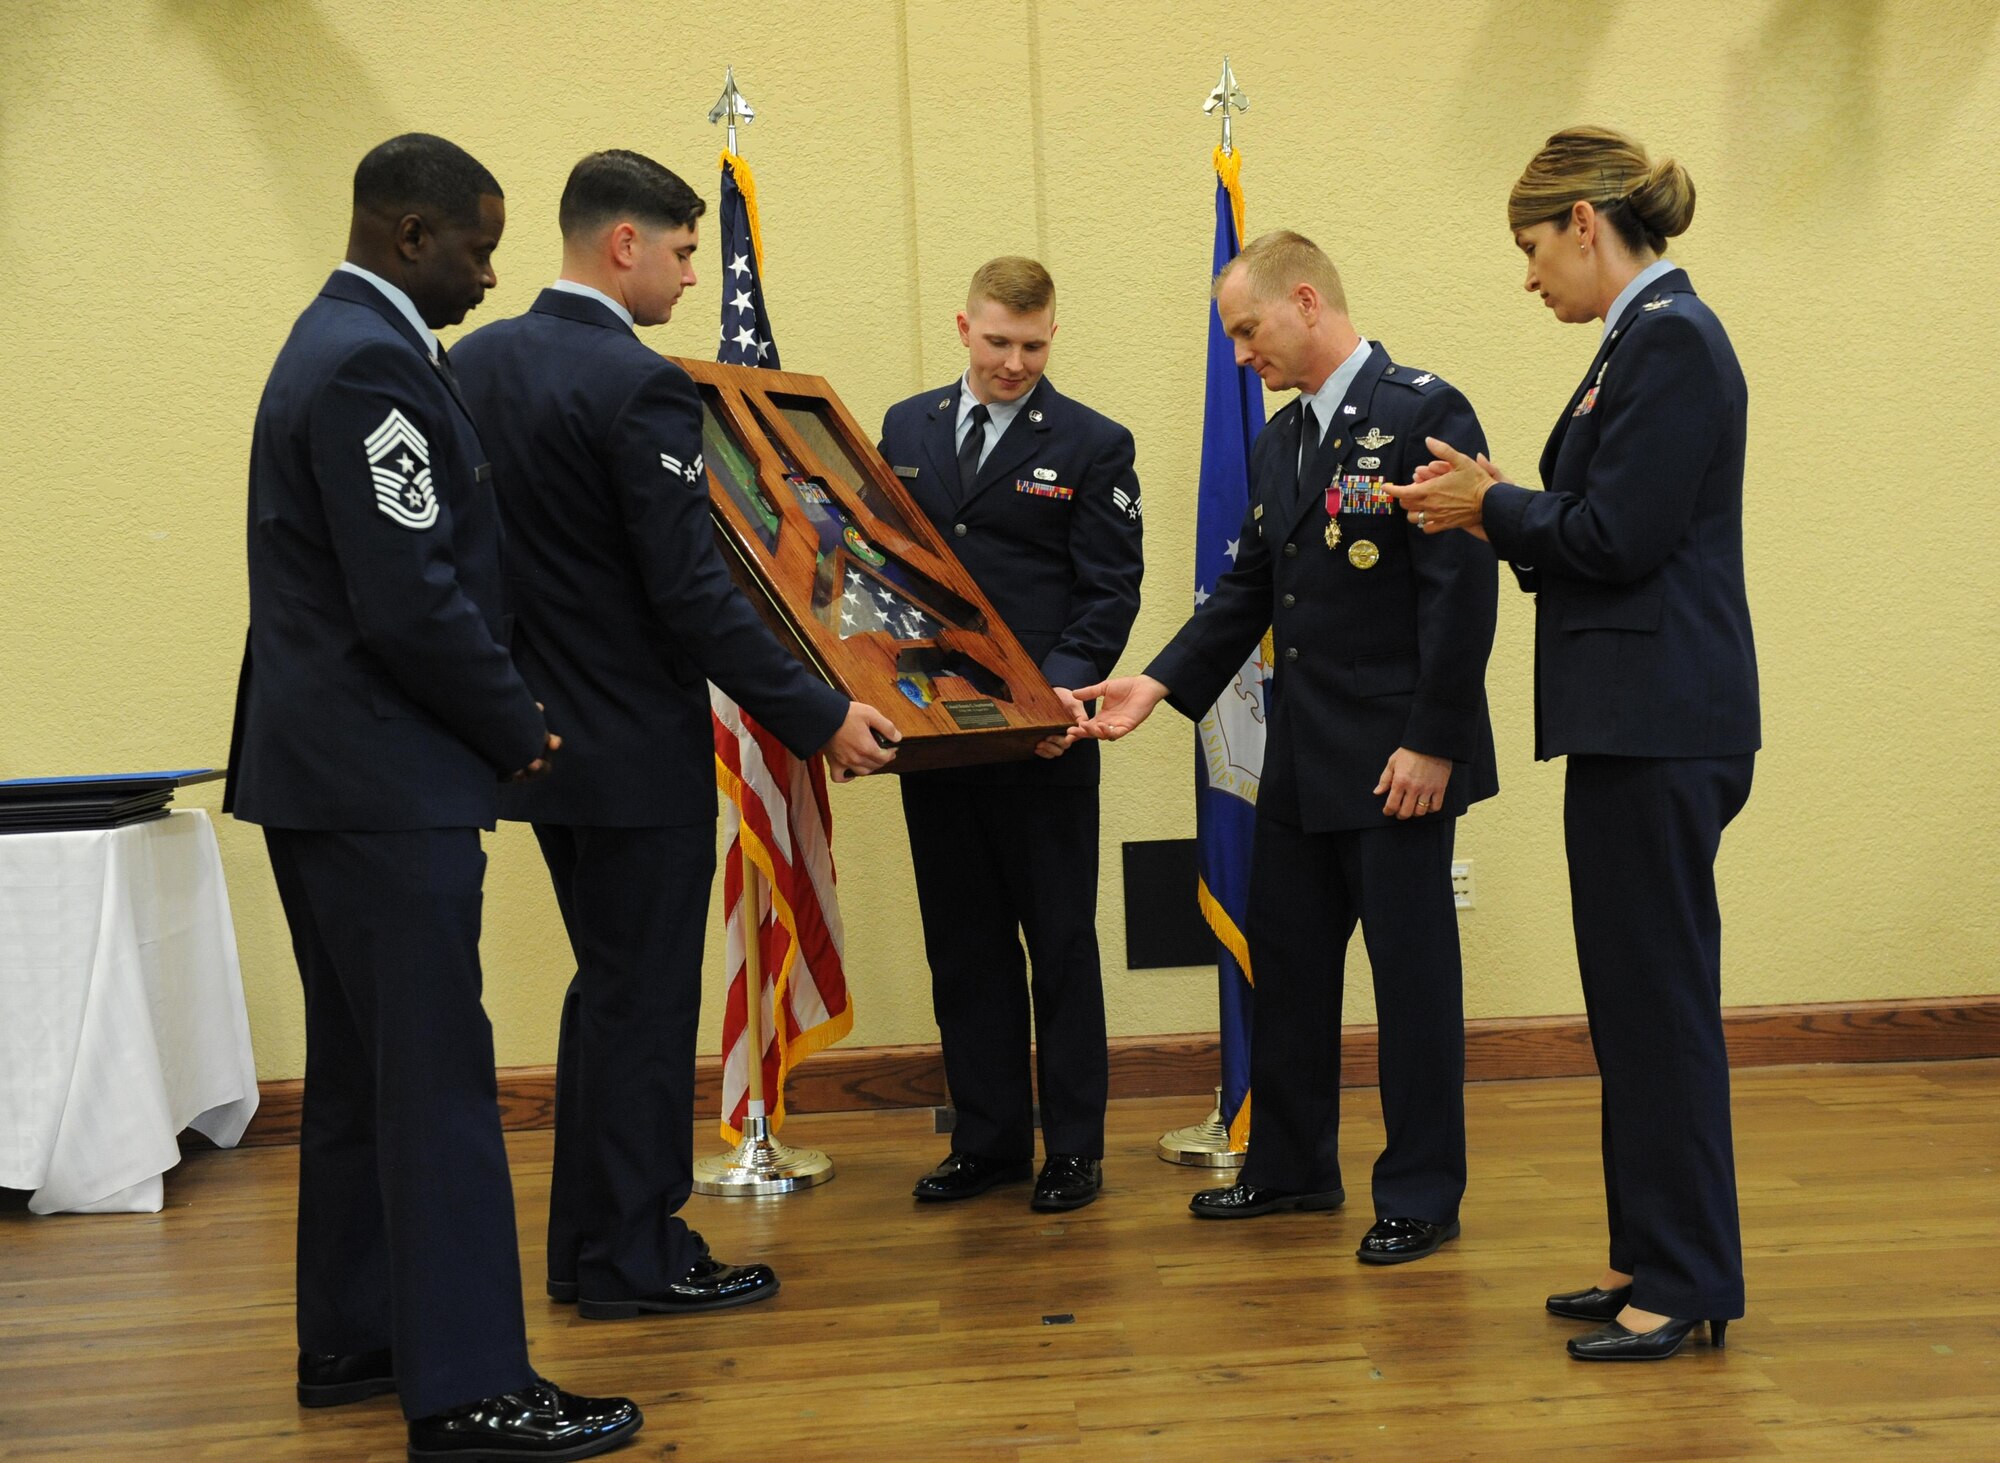 Chief Master Sgt. Harry Hutchinson, 81st Training Wing command chief, and Col. Michele Edmondson, 81st TRW commander, presents a gift on behalf of the 81st TRW to Col. Dennis Scarborough, 81st TRW vice commander, during his retirement ceremony at the Bay Breeze Event Center June 28, 2016, on Keesler Air Force Base, Miss. Scarborough retired with 27 years of military service. He has served multiple tours as an F-15C instructor and evaluator and has held positions in the fields of defense policy, operational plans, safety and aircraft maintenance. He has commanded at the squadron level and served as an operations group deputy commander. (U.S. Air Force photo by Kemberly Groue/Released)